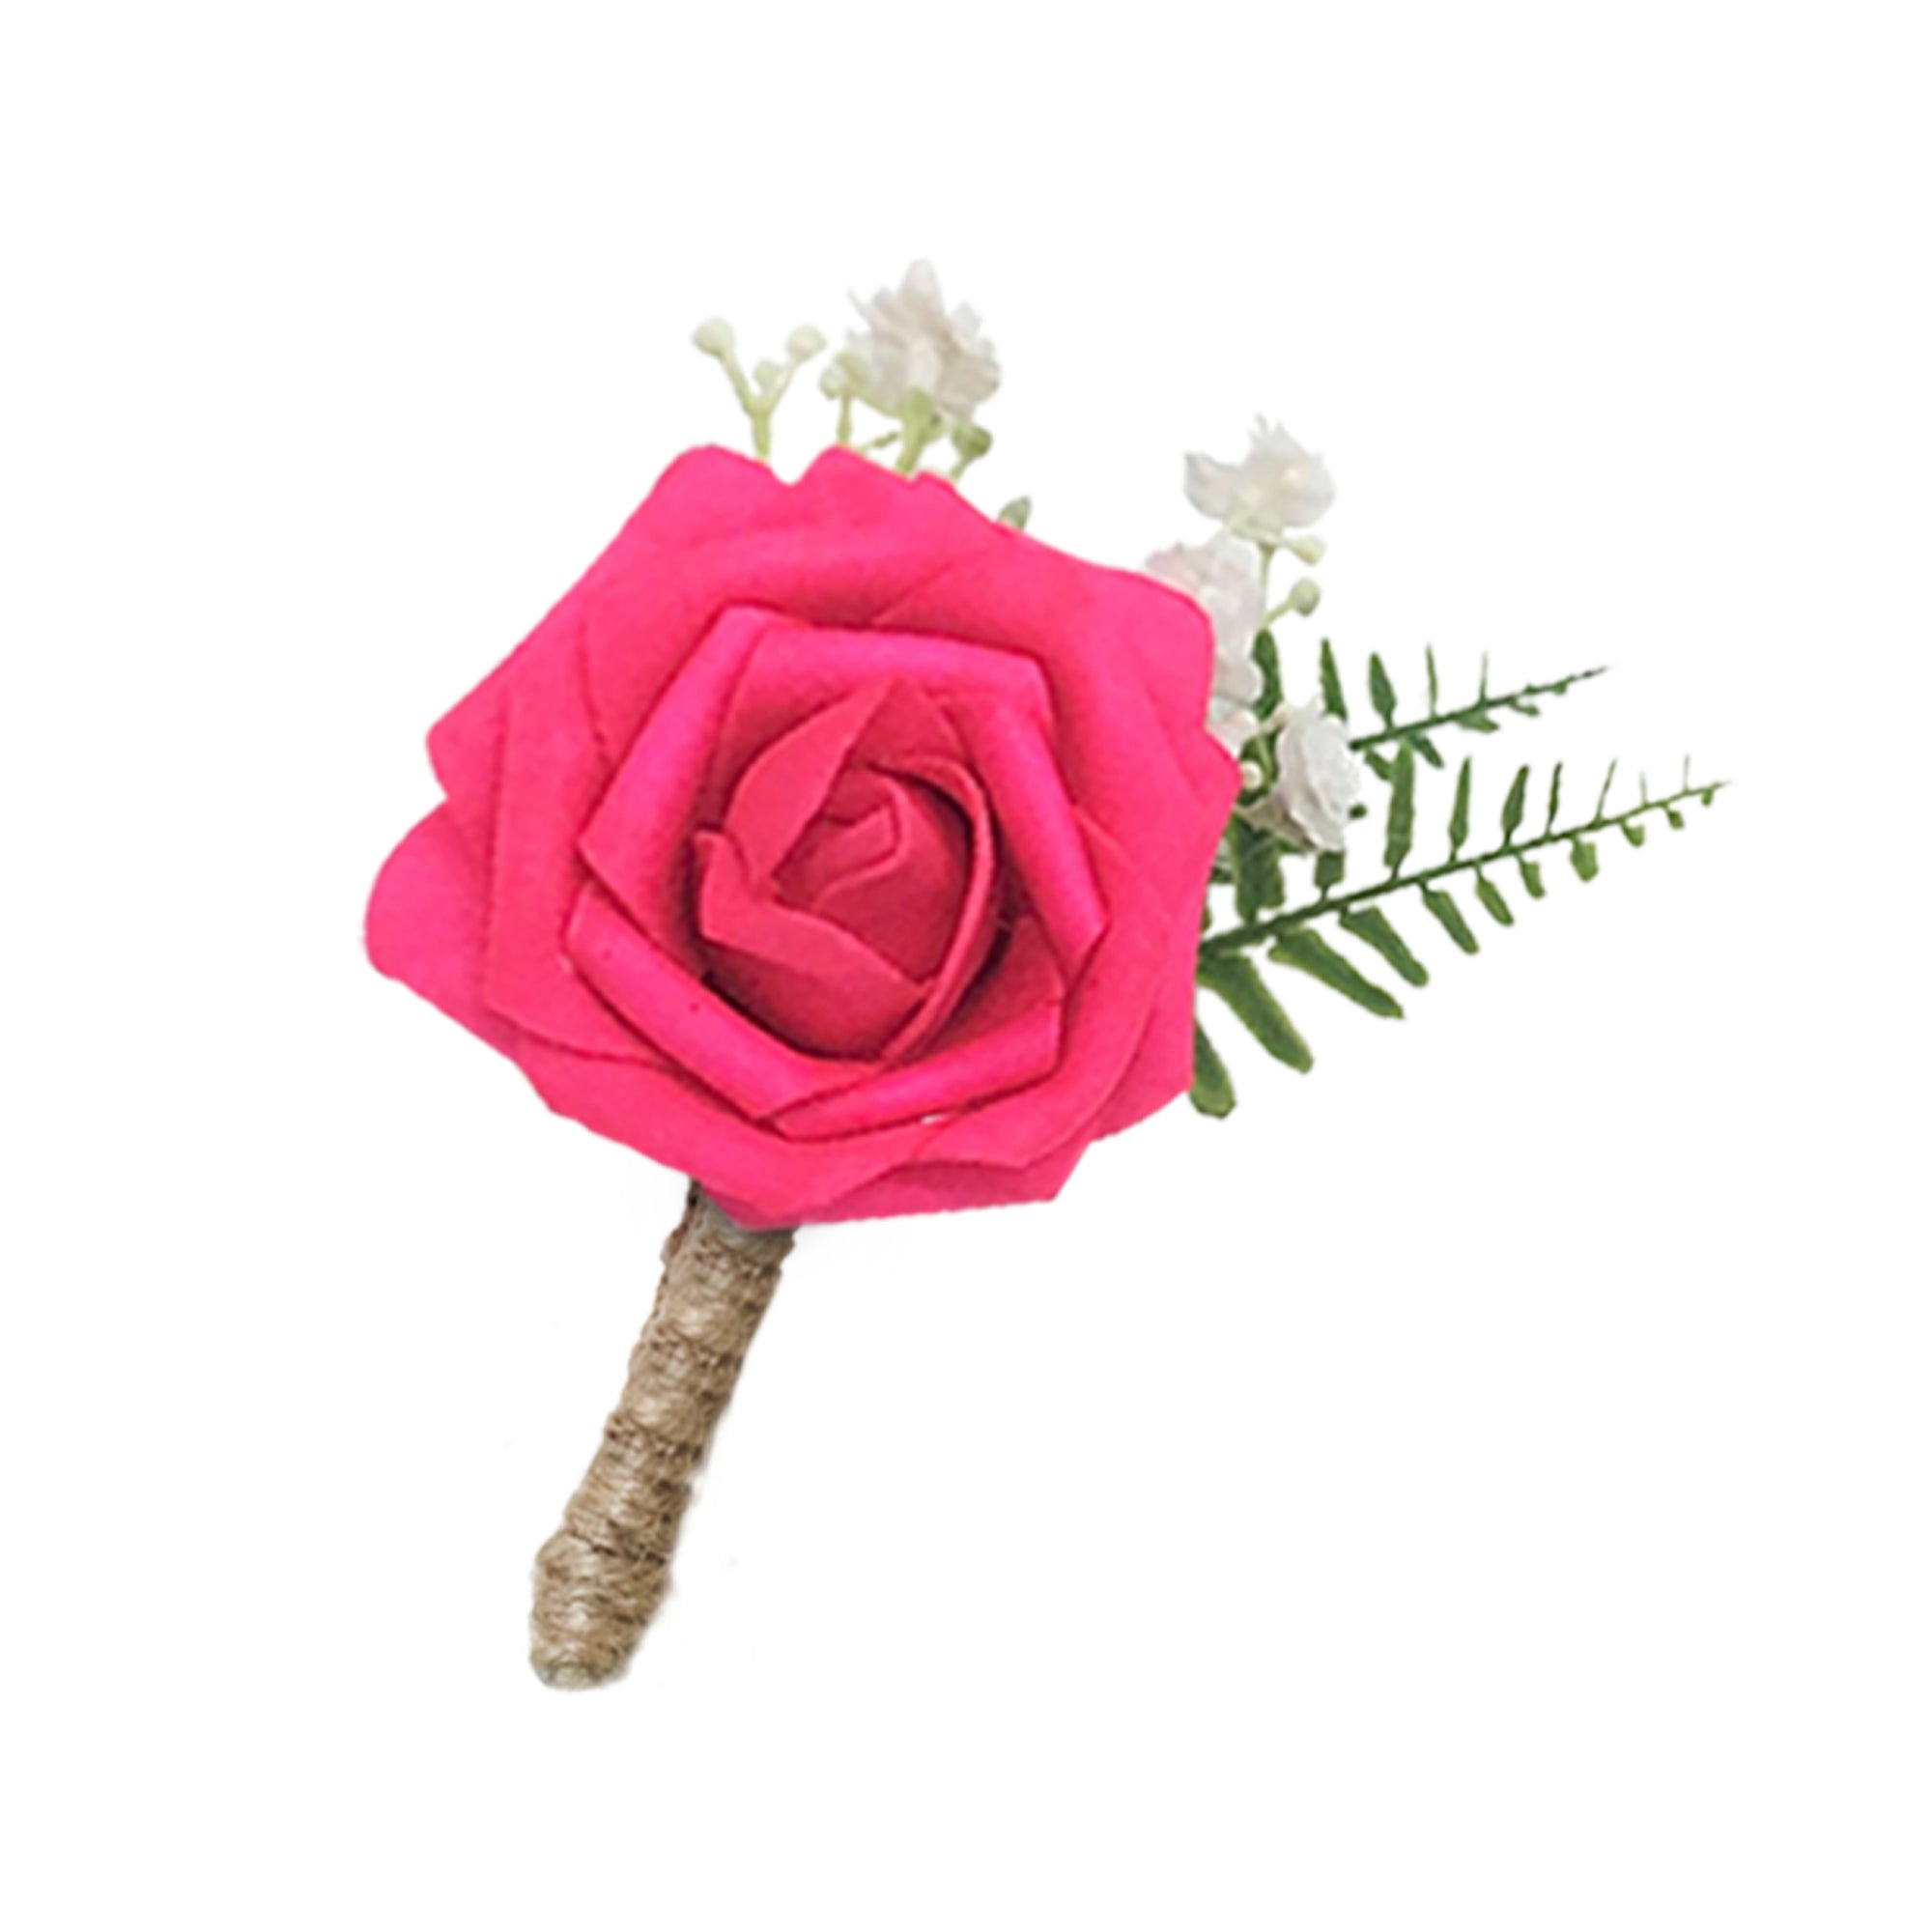 Hot Pink Rose Boutonniere for Groom Man